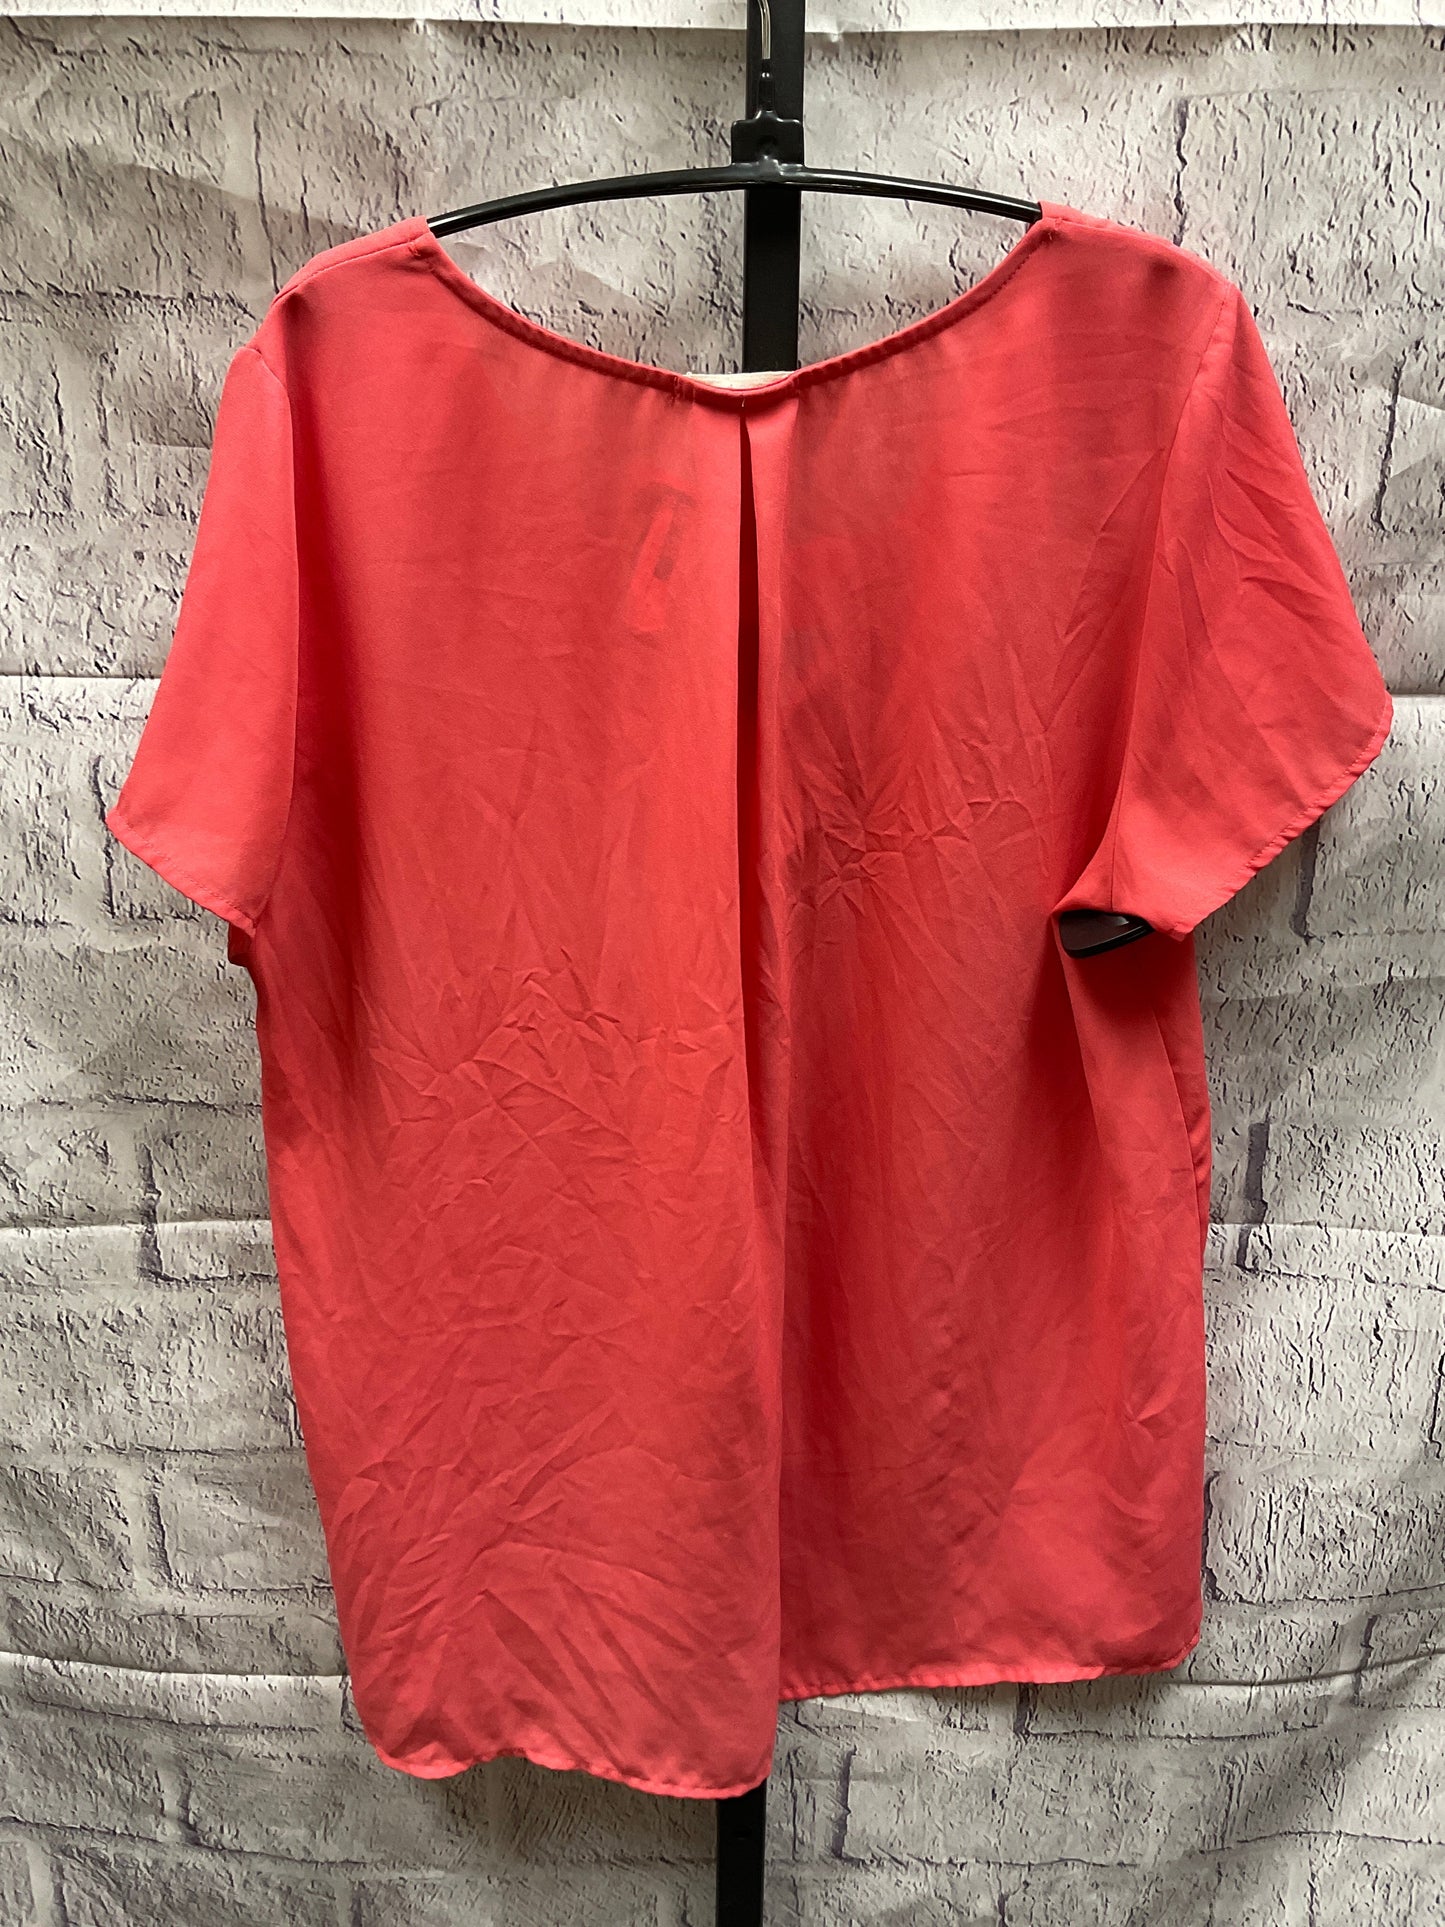 Top Short Sleeve By Pleione  Size: M